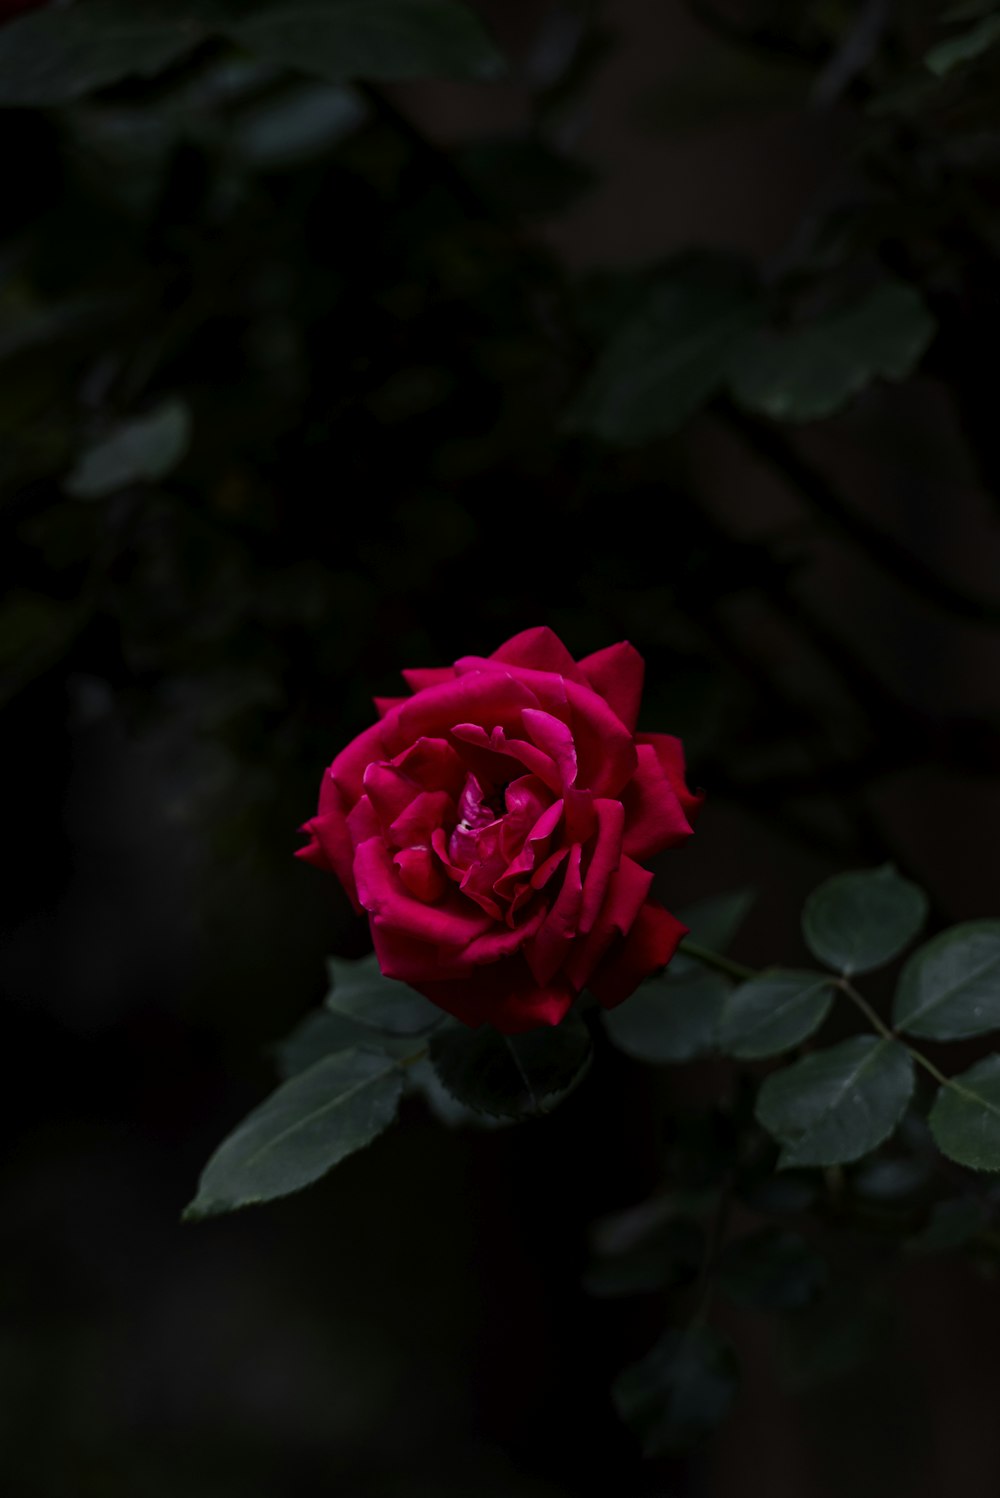 a red rose with green leaves on a dark background